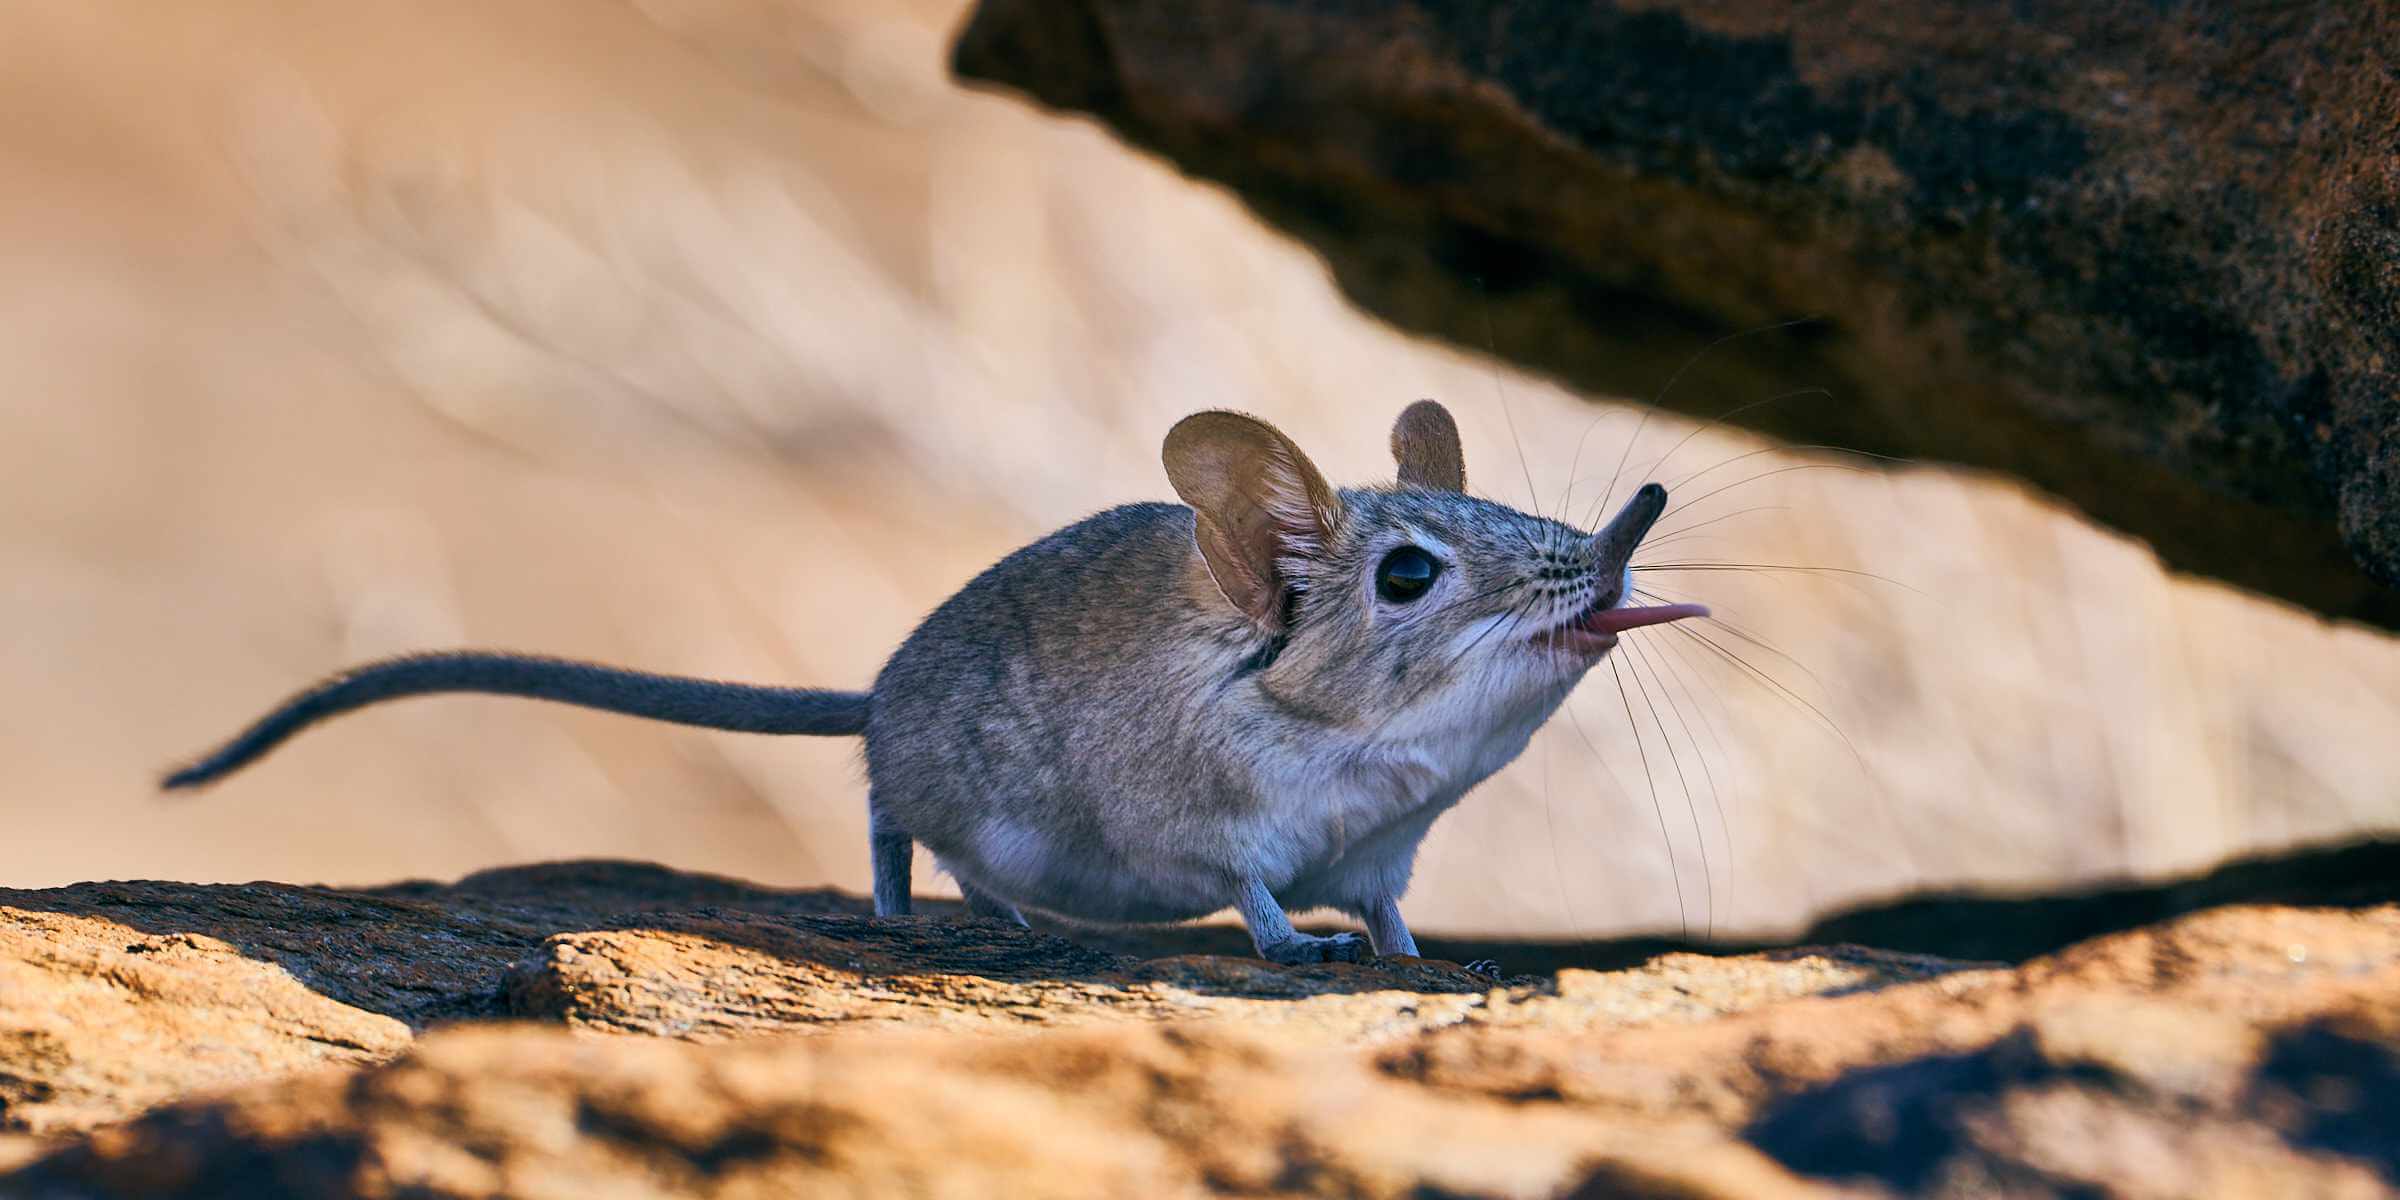 An Elephant shrew is inquisitive and investigates its surroundings.